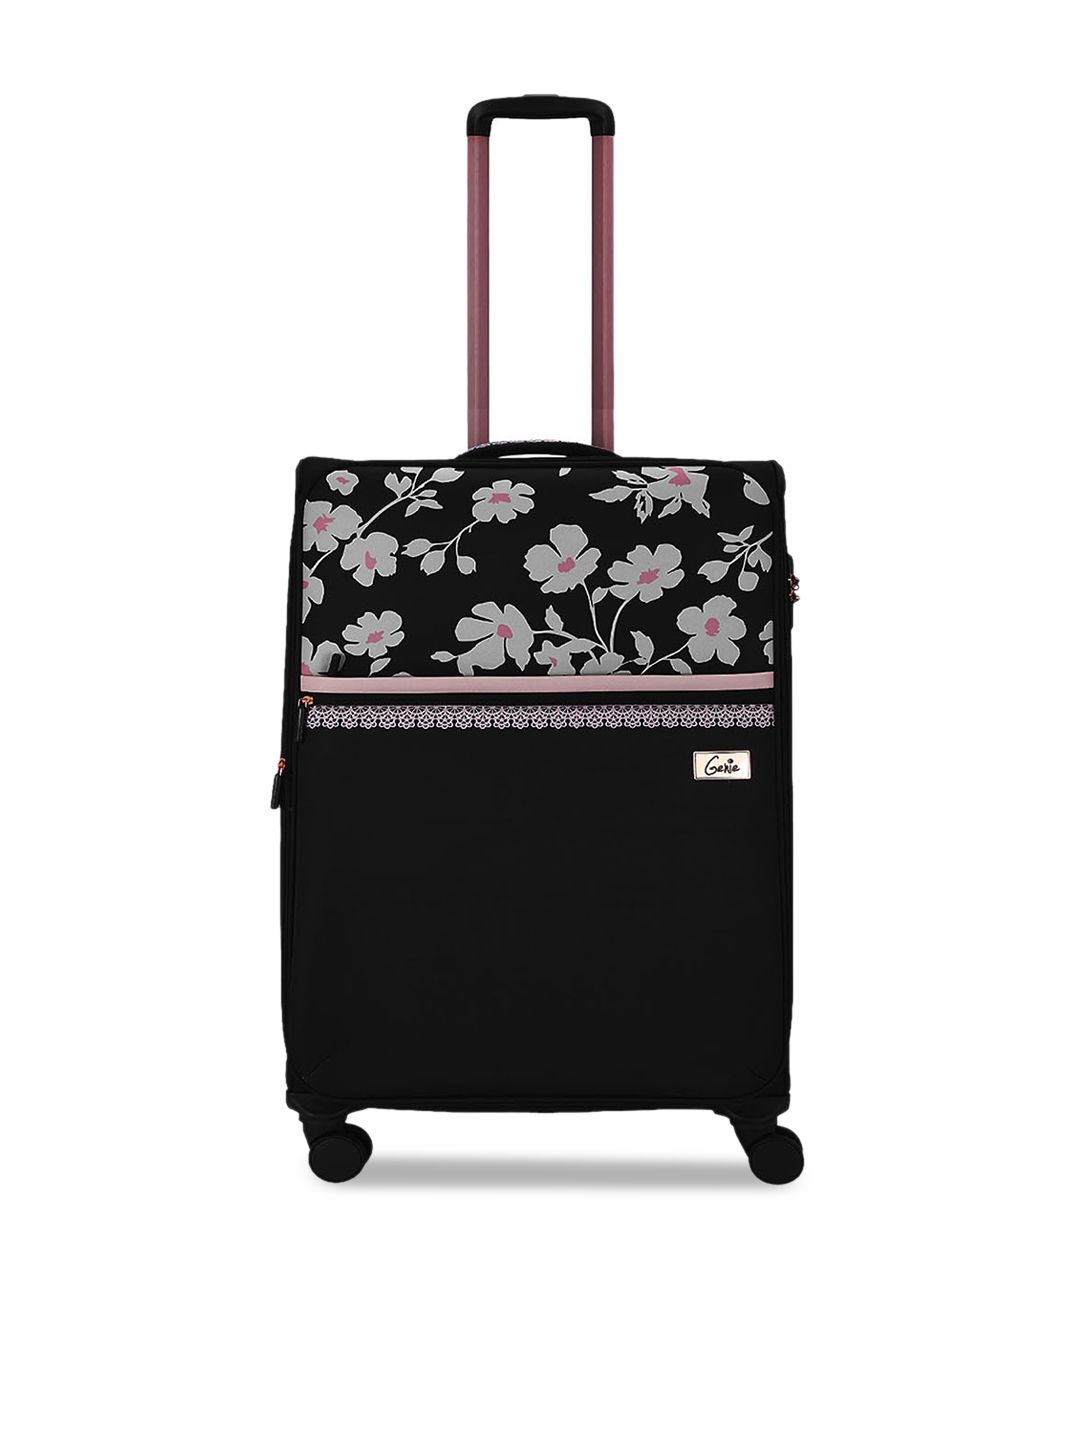 Genie Black & White Printed Soft-Sided Small Trolley Suitcase Price in India